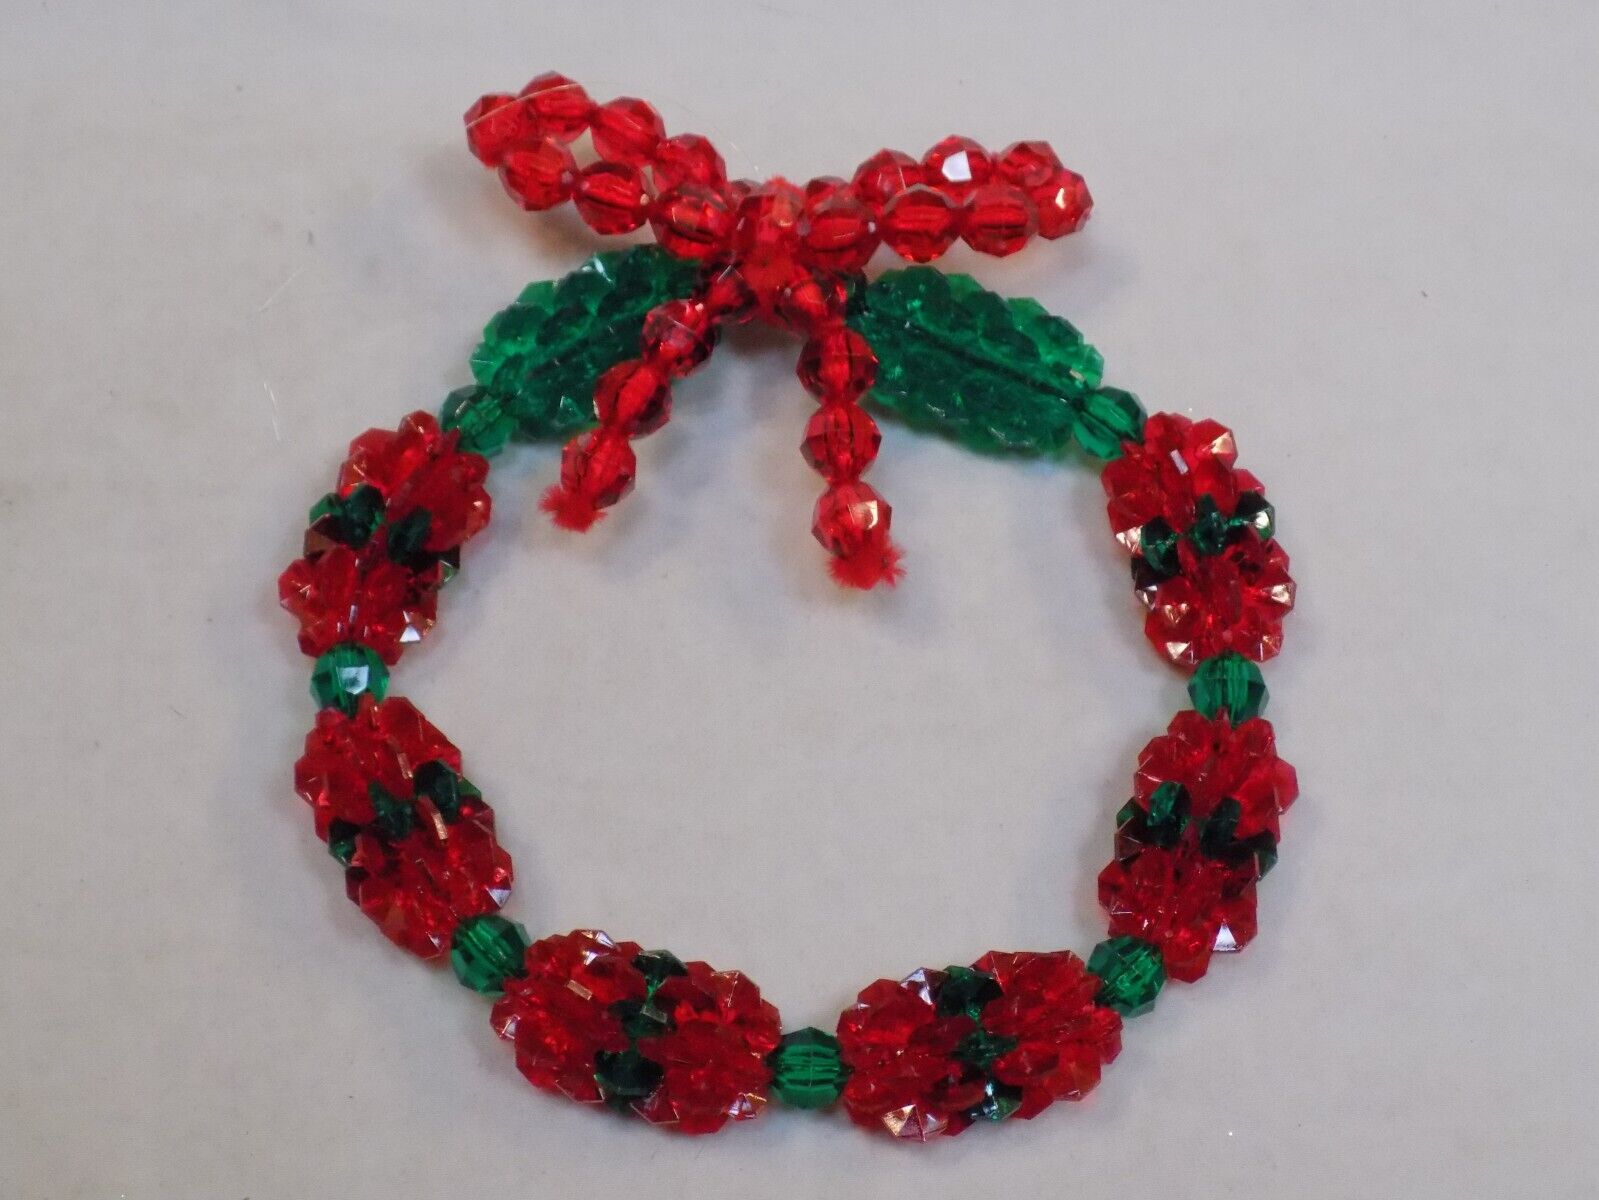 Large Wreath Red Plastic Green Beads Ornament Christmas Tree Holiday Vintage Old